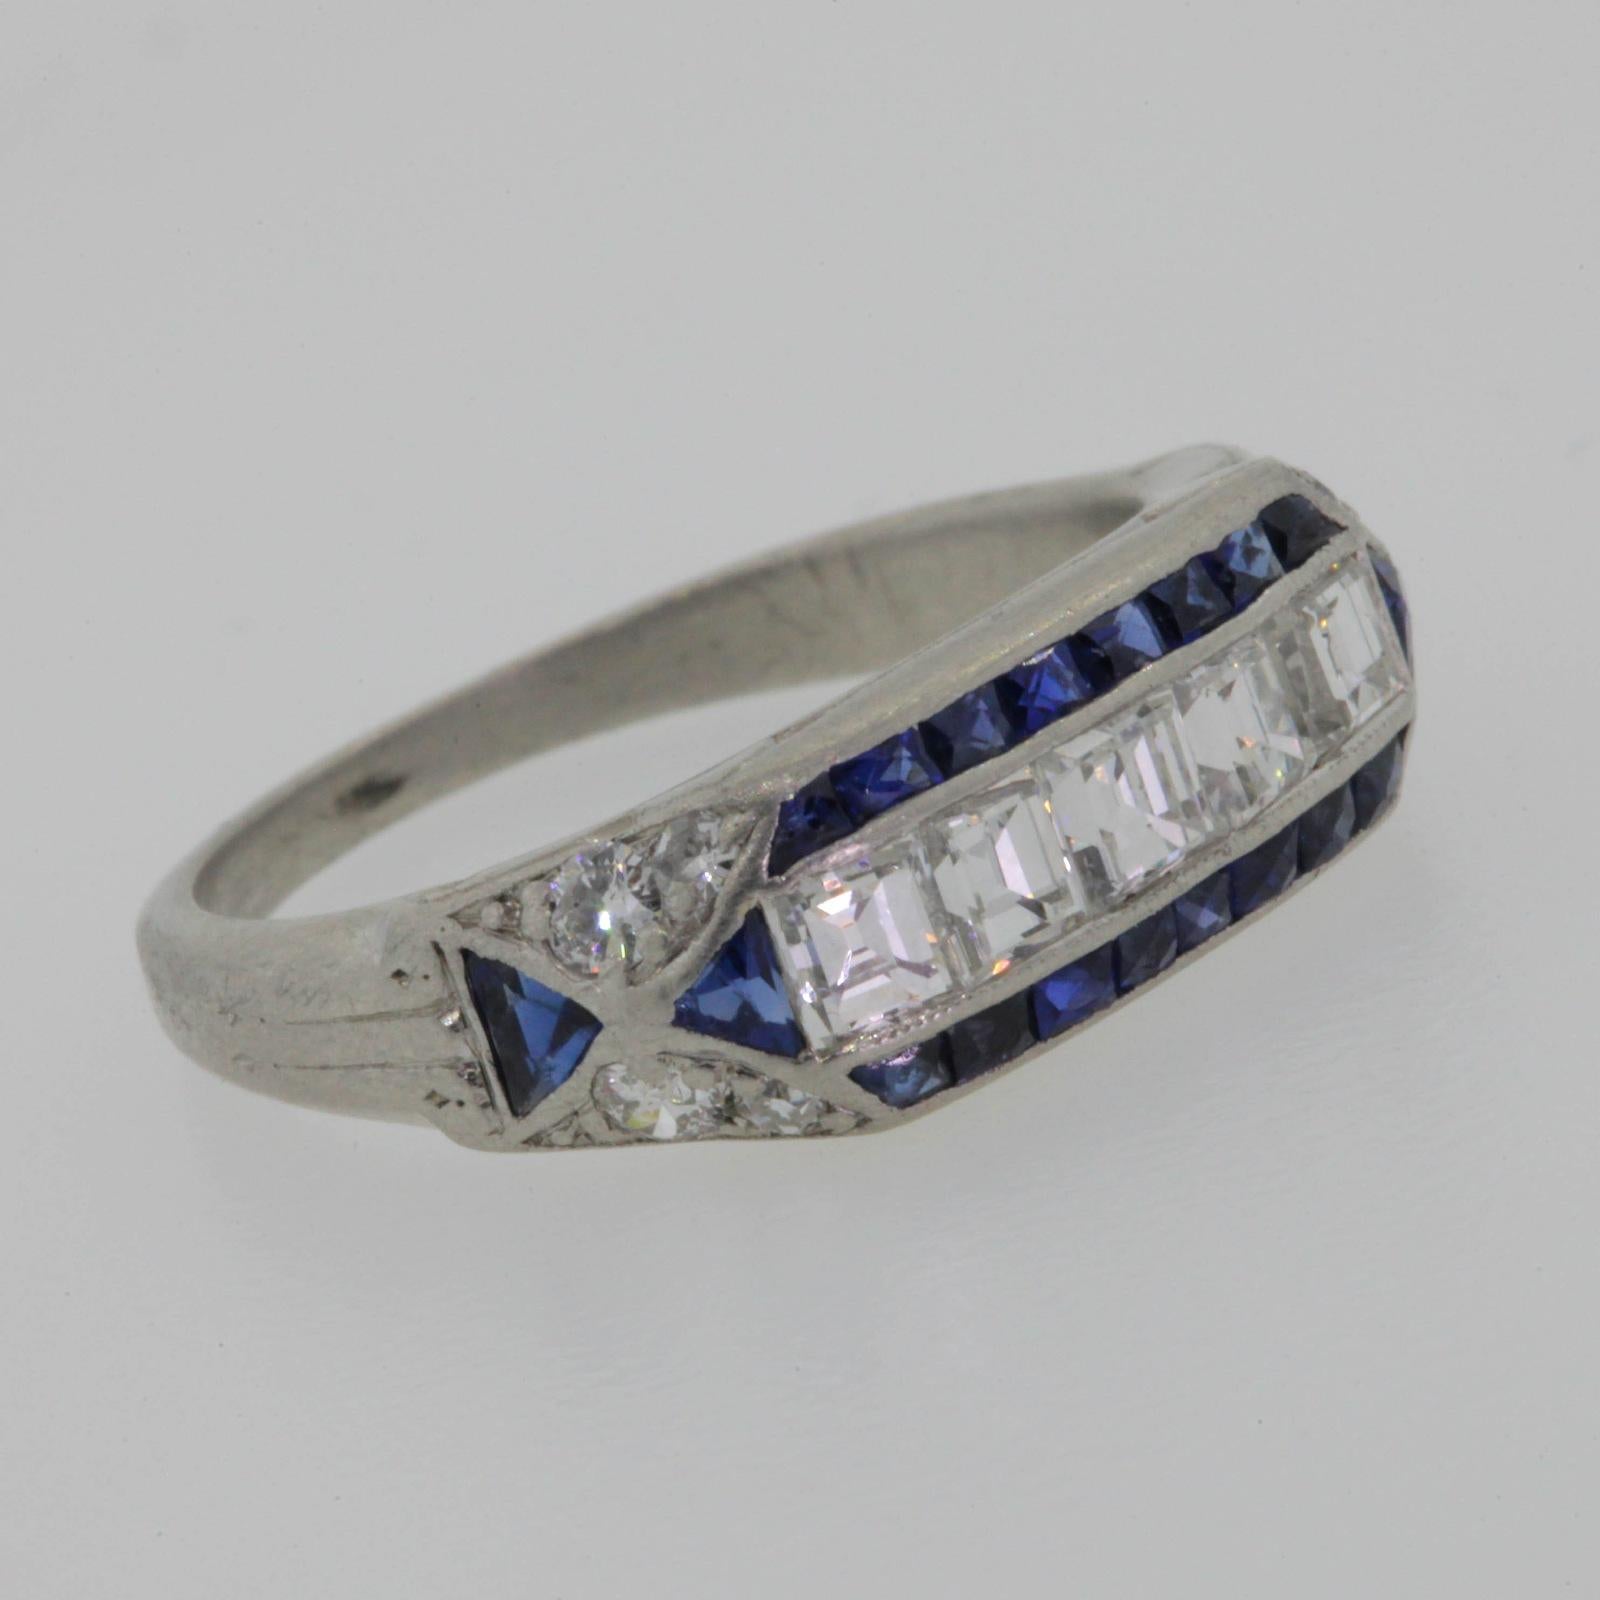 This beautiful, softly worn engraved platinum 1930 style ring features a row of five square cut diamonds, totally 0.65 carat.  Hugging the diamonds are two rows of calibrated French cut blue Ceylon Sapphires, four old cut Round diamonds and two